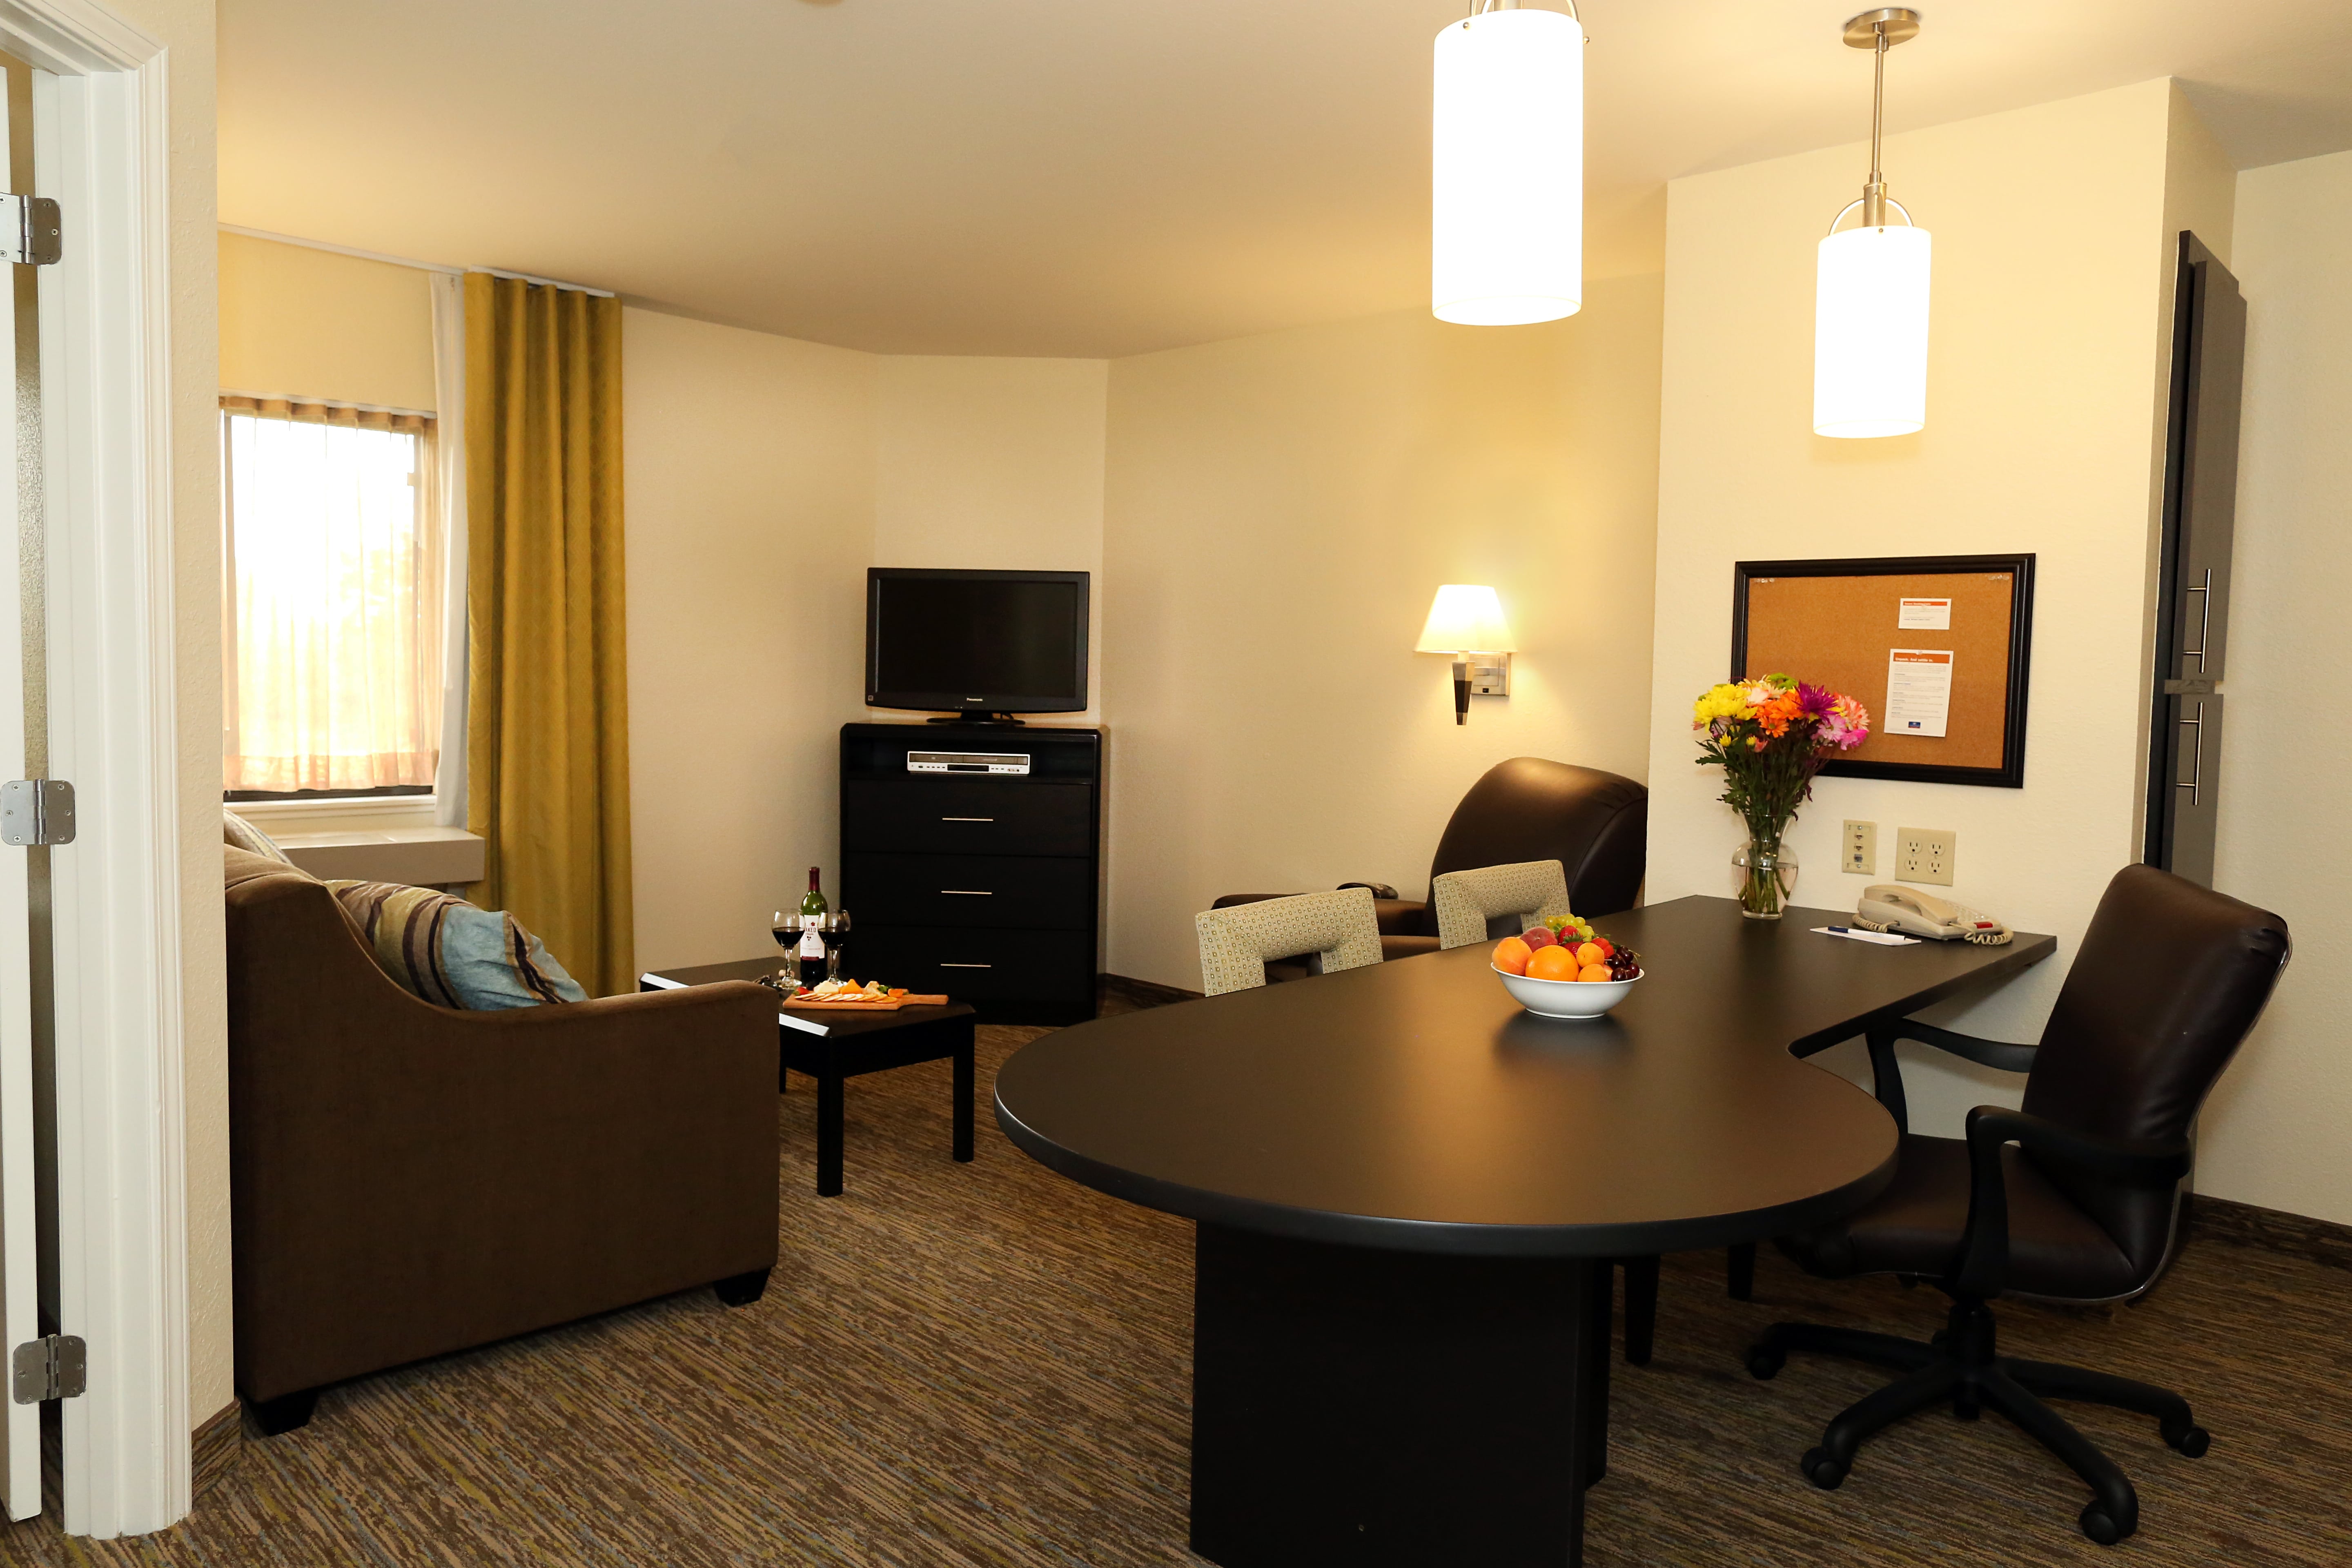 Candlewood Suites - Henry Center for Executive Development | Eli Broad College of ...5760 x 3840